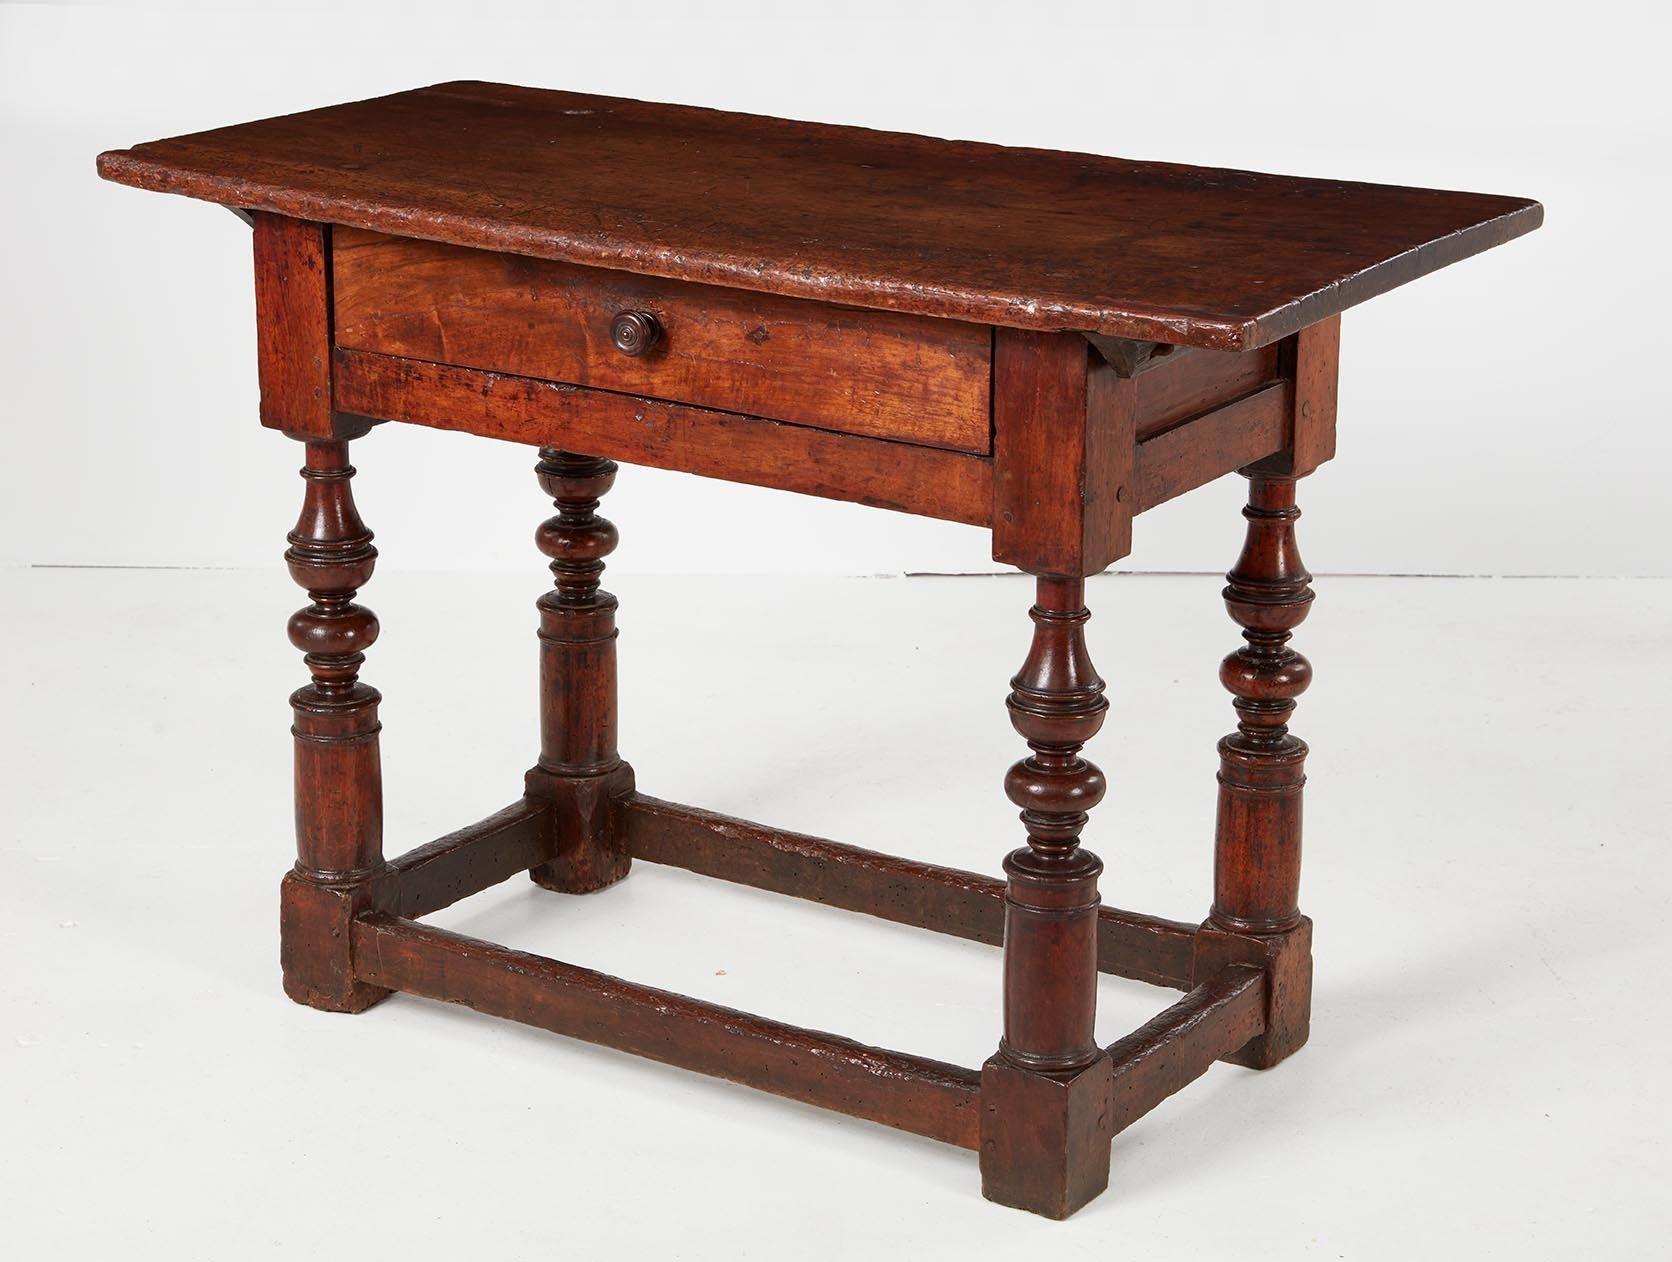 Good 17th Century Italian walnut stretcher base table, the single walnut plank top with dovetailed cleats over single drawer having turned knob and standing on boldly turned legs joined by box stretcher, the whole with good rich color and patination.